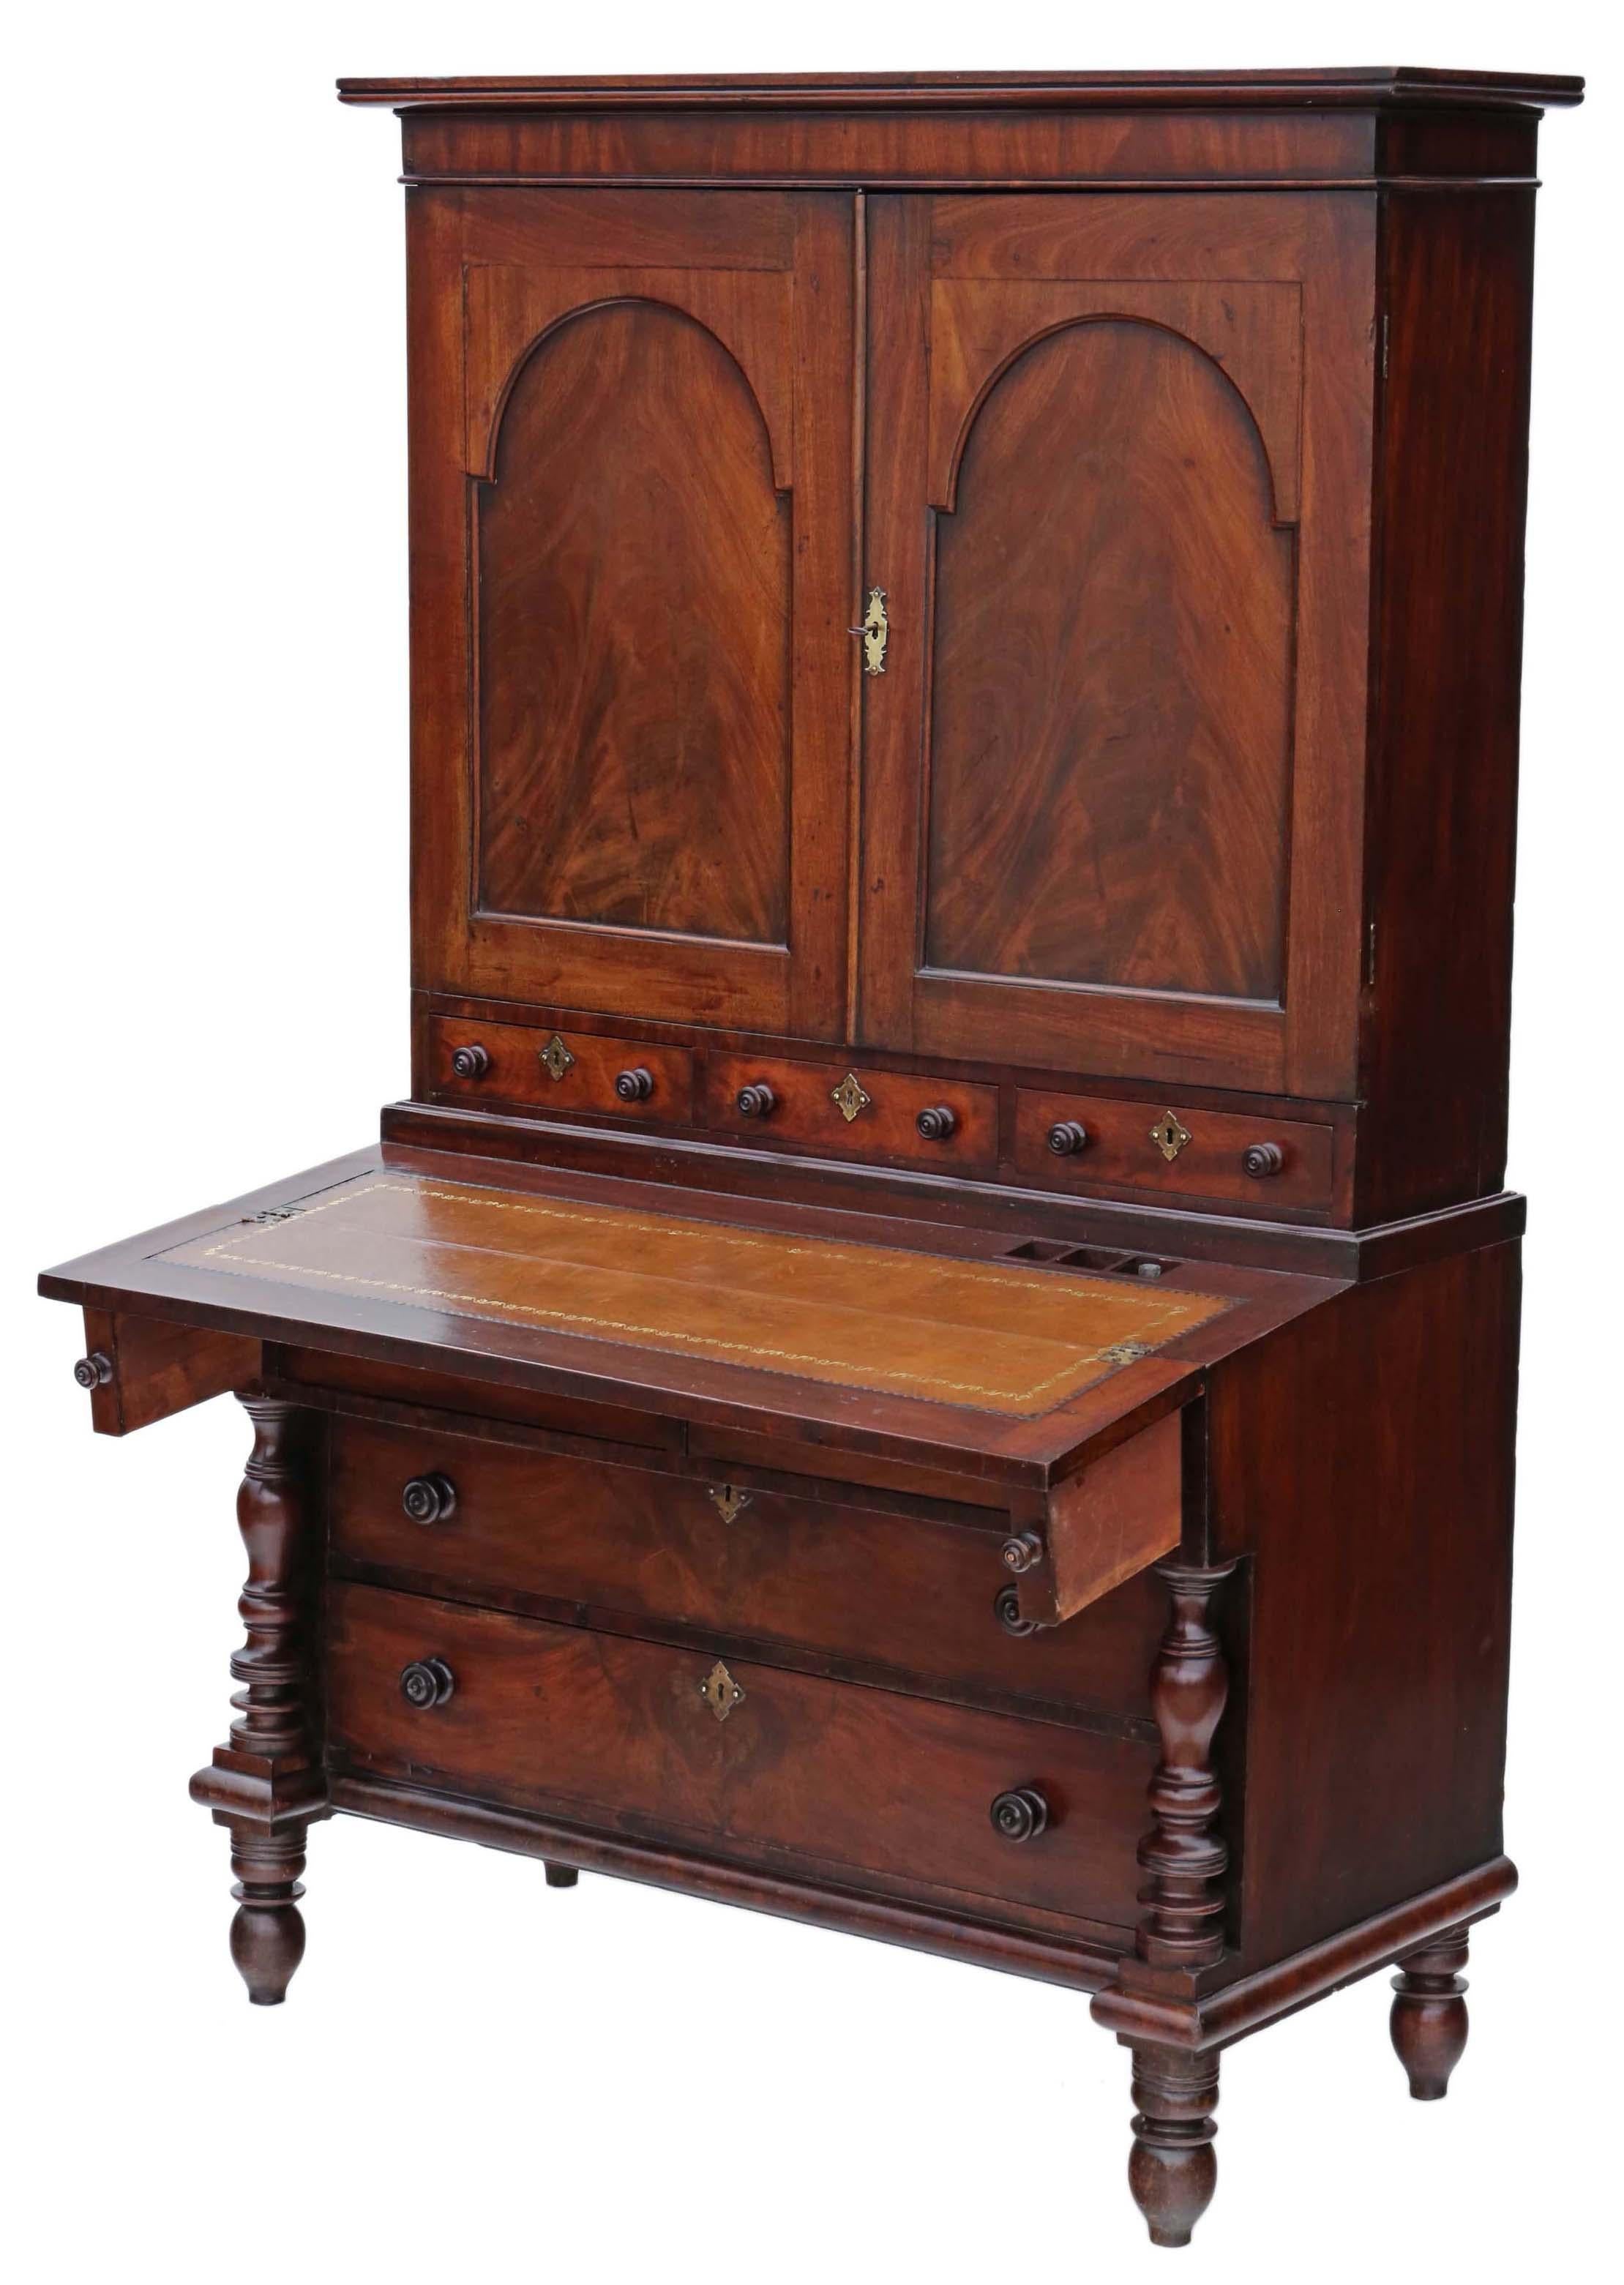 Antique High-Quality Mahogany Housekeeper's Cupboard with Secretaire, circa 1800 For Sale 2